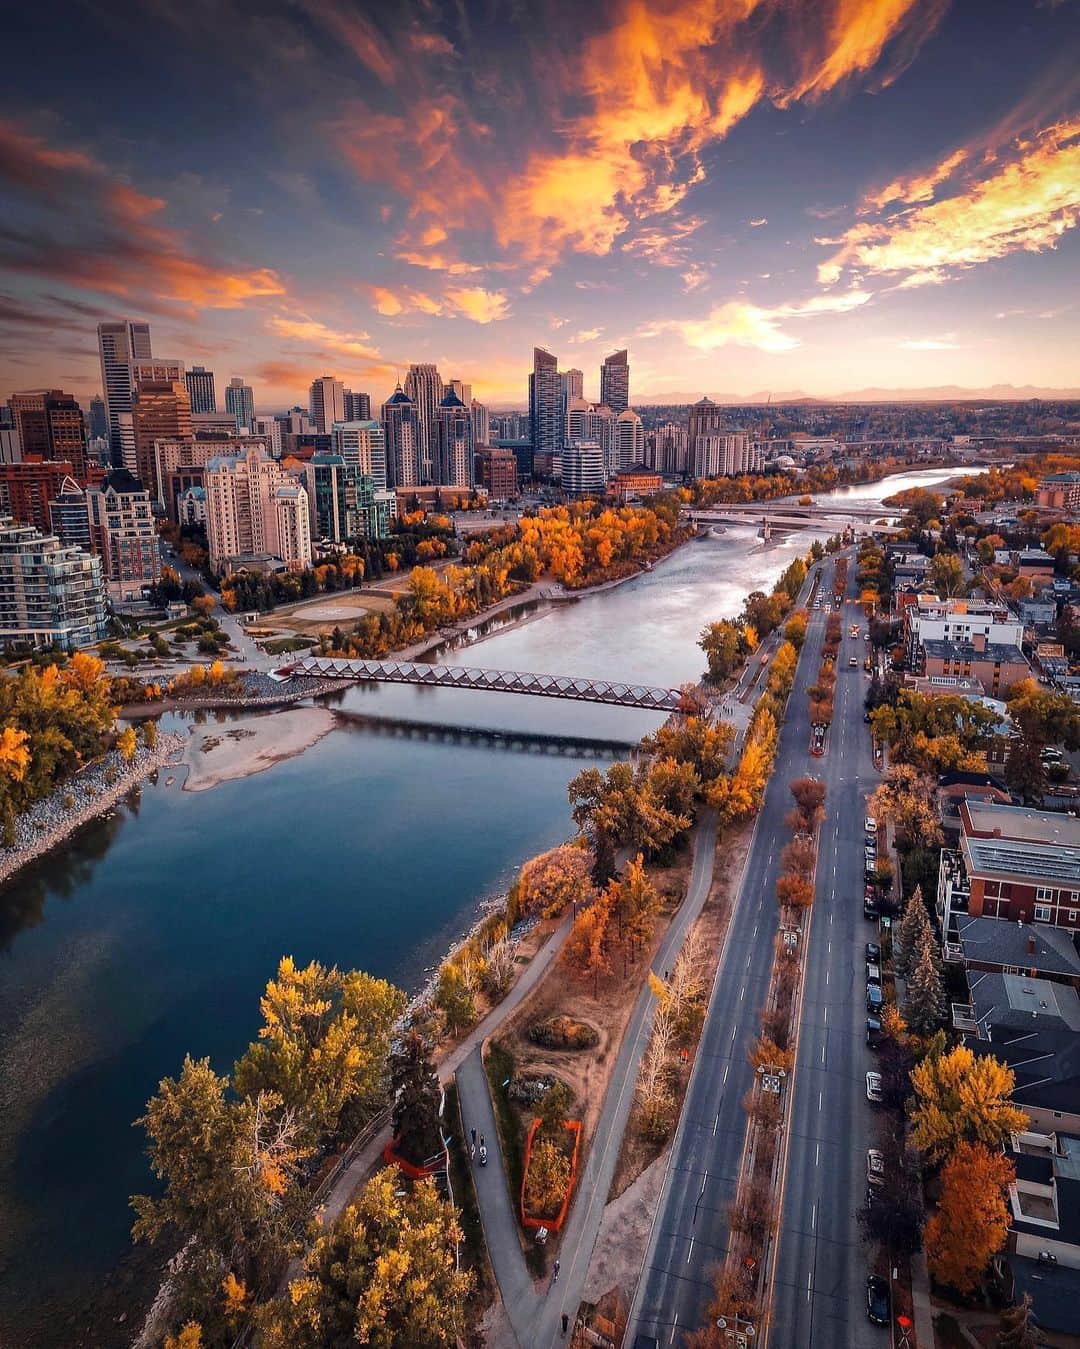 Explore Canadaのインスタグラム：「With vibrant colored trees, calm waters, and a stunning skyline, who could resist falling for Calgary’s autumn charm?   📷: @pushtheimpossible 📍: Calgary, Alberta, @tourismcalgary @travelalberta  #CaptureCalgary #ExploreAlberta #ExploreCanada  Image description: A bird’s eye view of Calgary’s skyline at sunset. A river sits in the middle of the city with an array of trees adorned in varying hues of orange, yellow, and green along its shore. Skyscrapers stand tall on the river’s bank.」